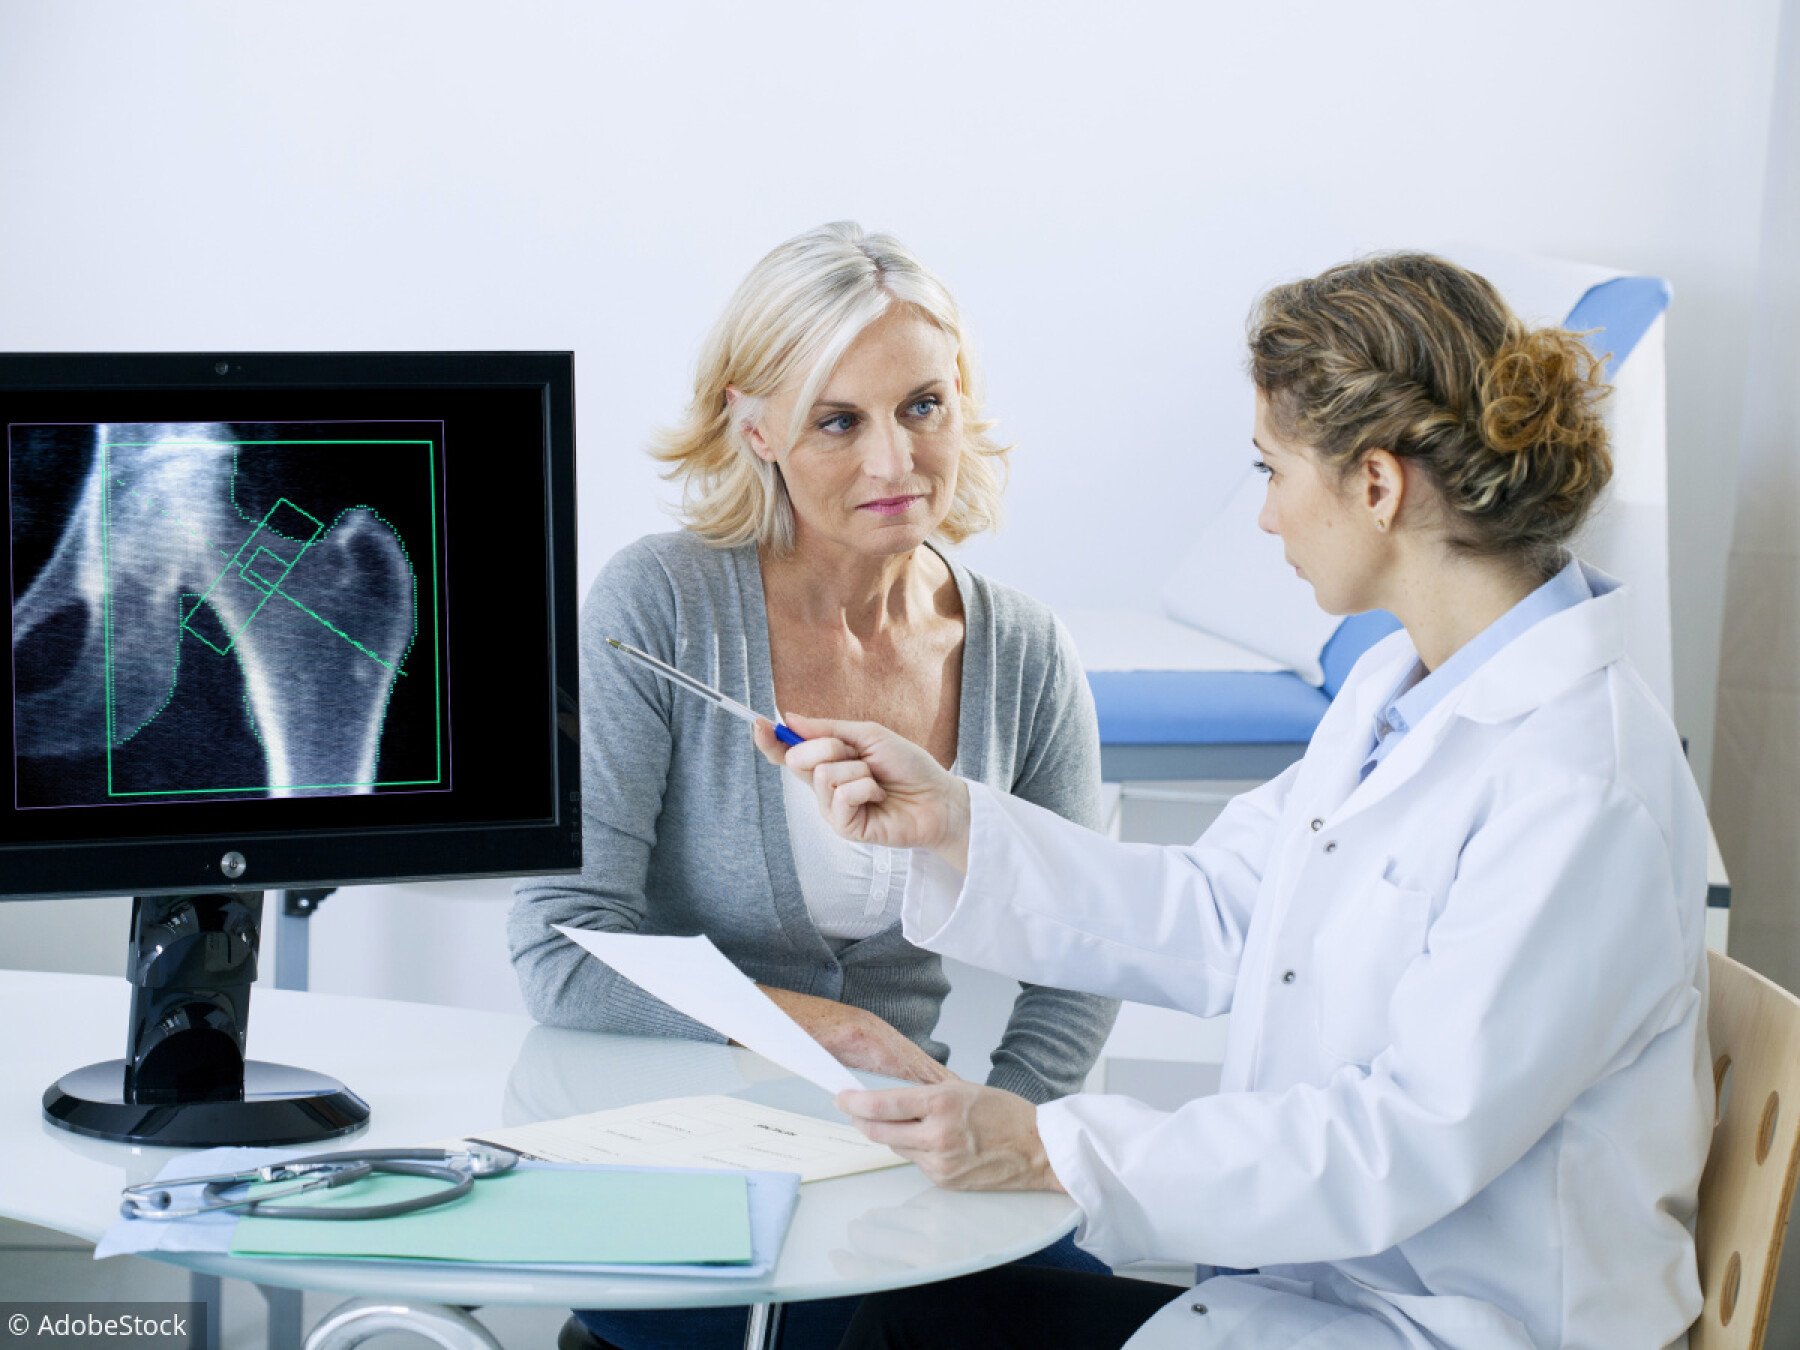   DEXA   DEXA (dual x-ray absorptiometry) scans measure bone density (thickness and strength of bones) by passing a high and low energy x-ray beam through the body, usually in the hip and the spine.   Learn more  